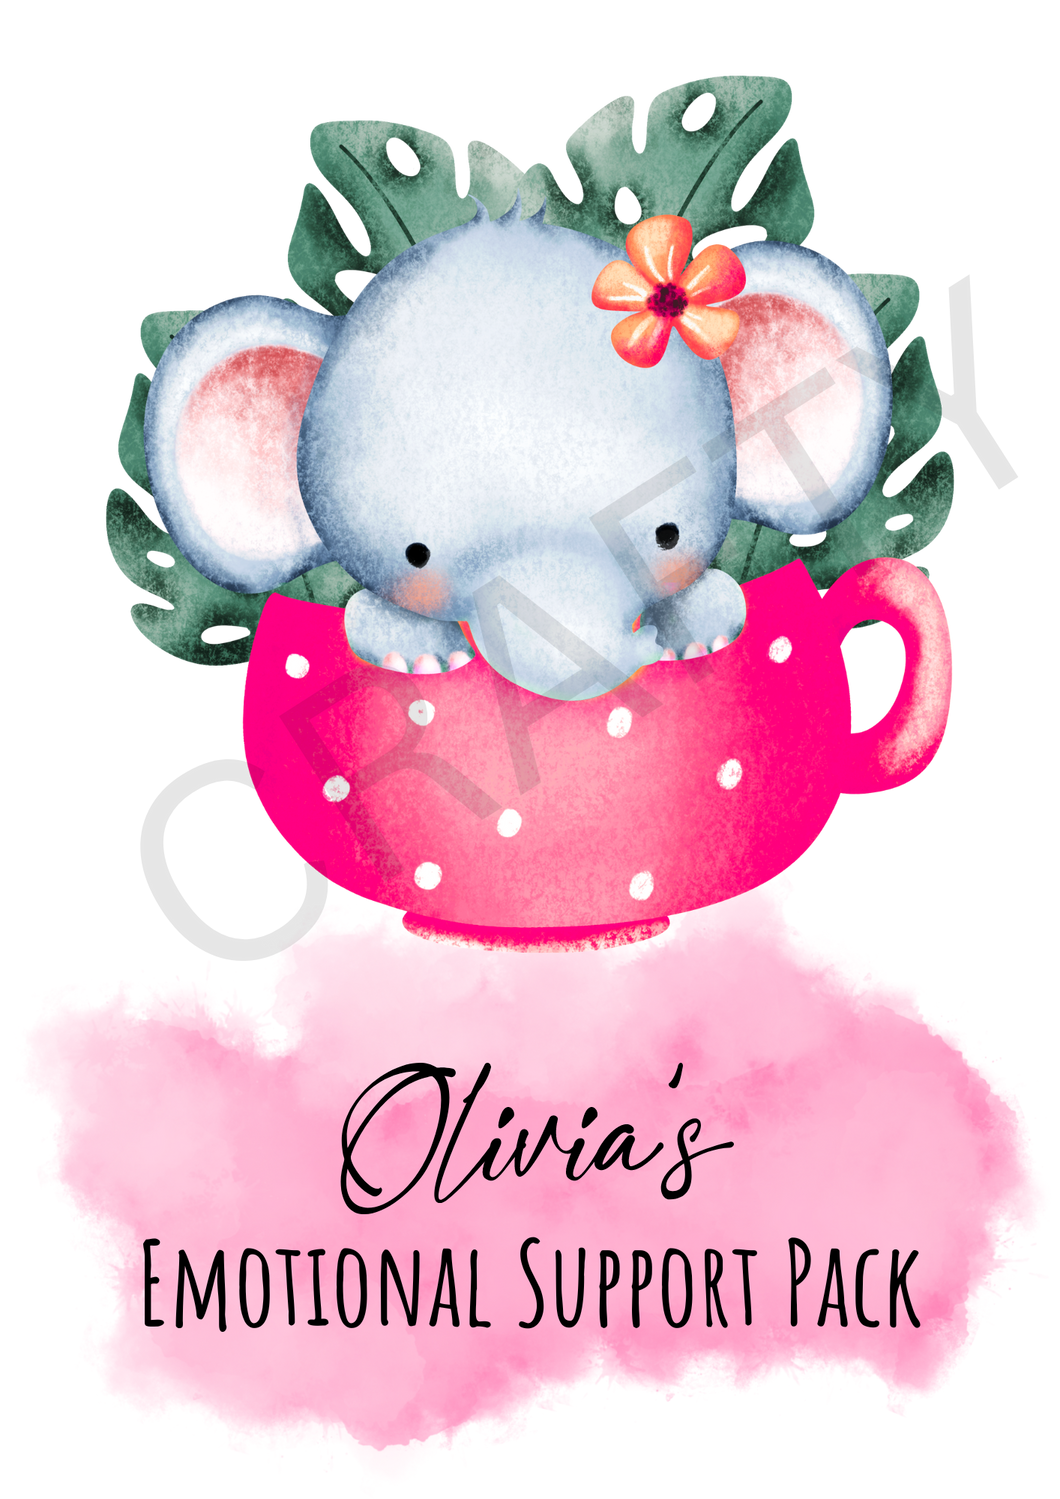 Customised Emotional Support Pack Cute Animal Design Sublimation Print